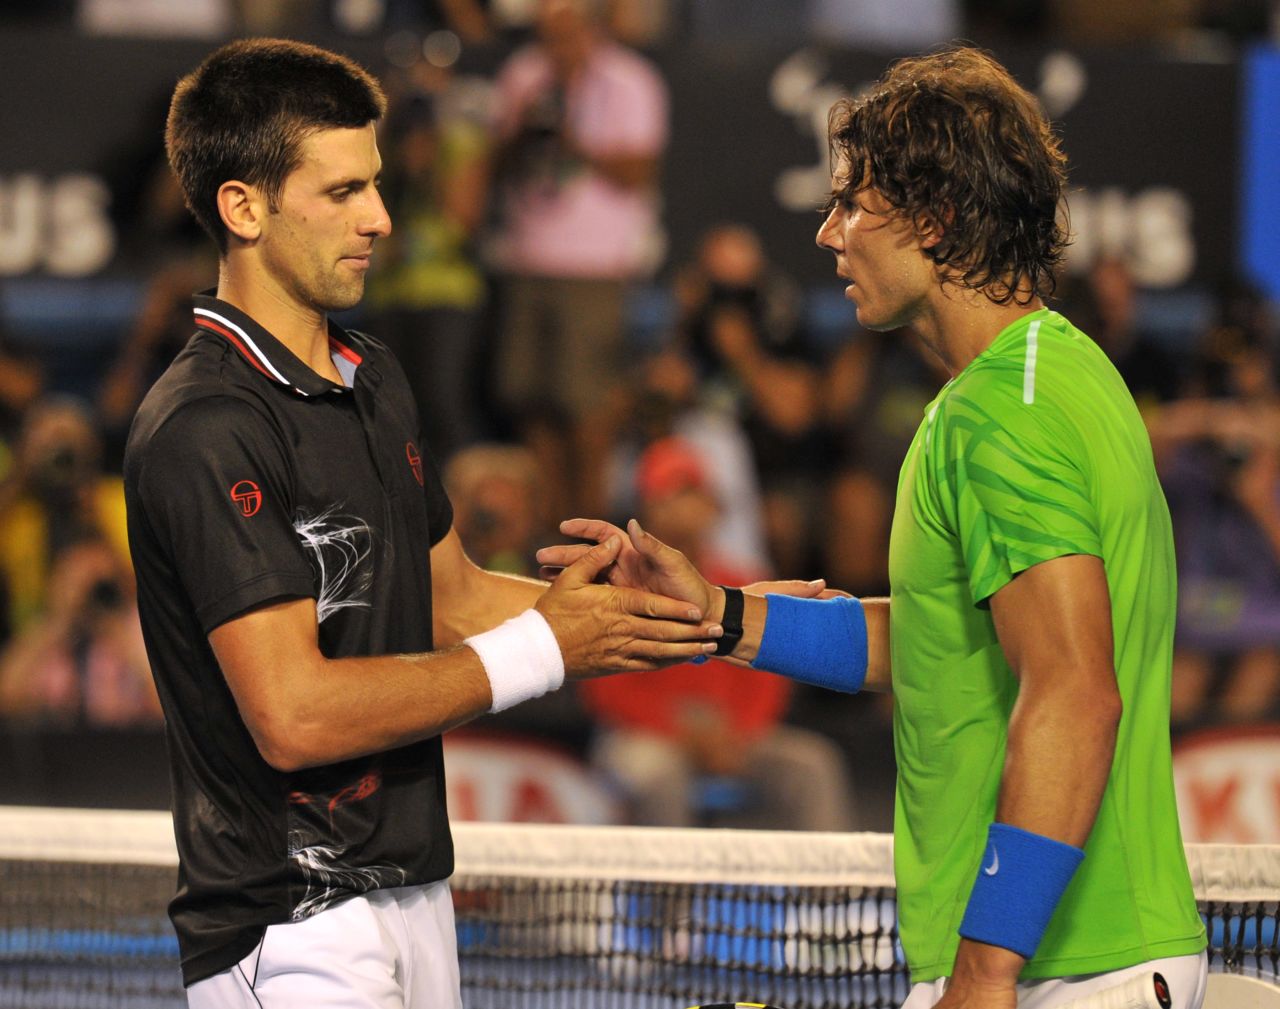 The 2012 tennis season began in earnest in January at the Australian Open. In the final, world No.1 Novak Djokovic and Spain's Rafael Nadal fought a titanic battle before the Serbian emerged on top after five marathon sets.